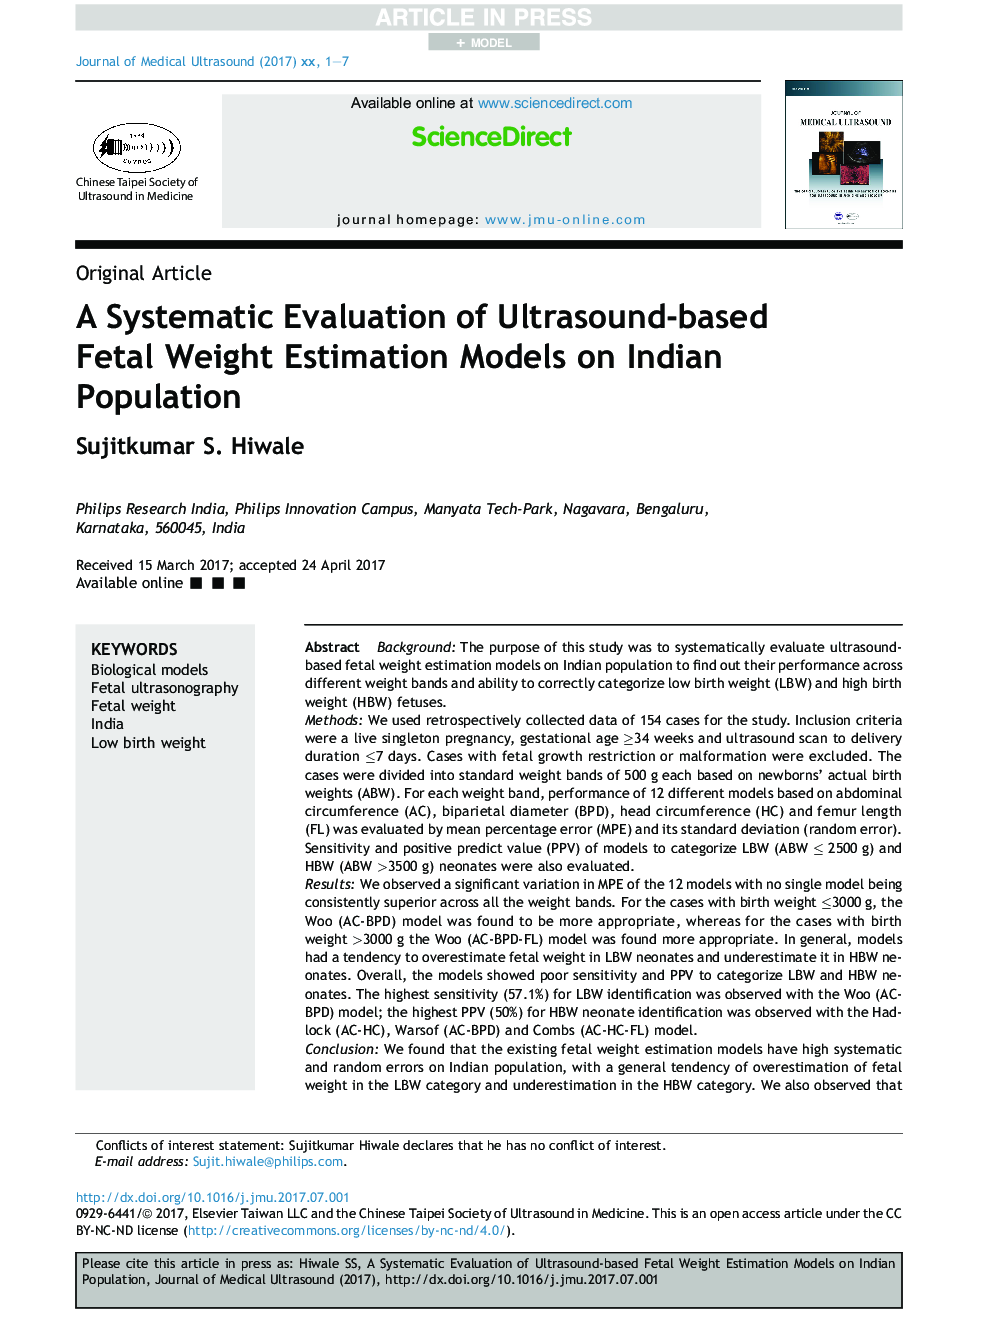 A Systematic Evaluation of Ultrasound-based Fetal Weight Estimation Models on Indian Population